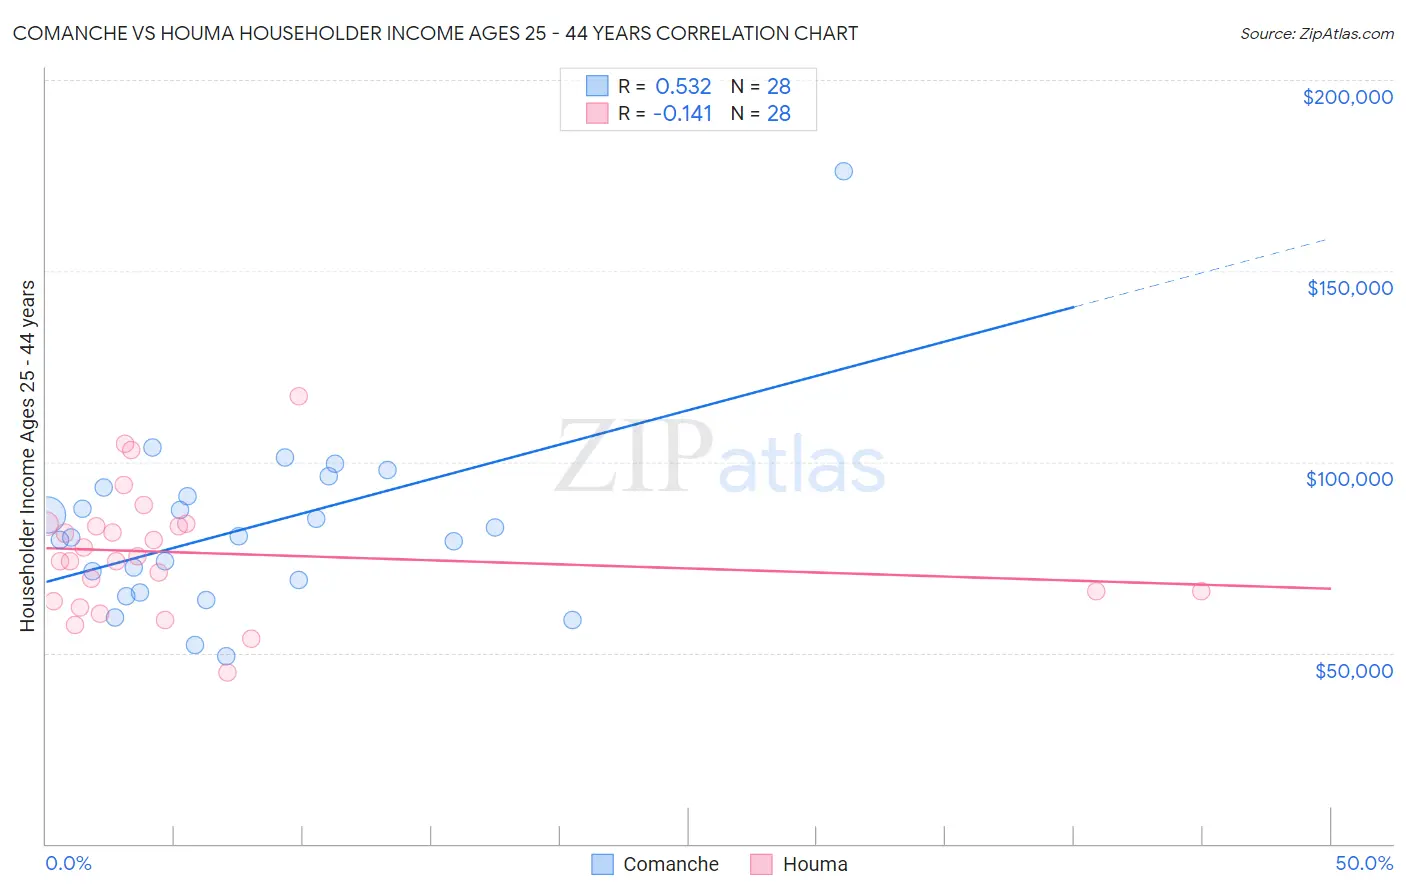 Comanche vs Houma Householder Income Ages 25 - 44 years